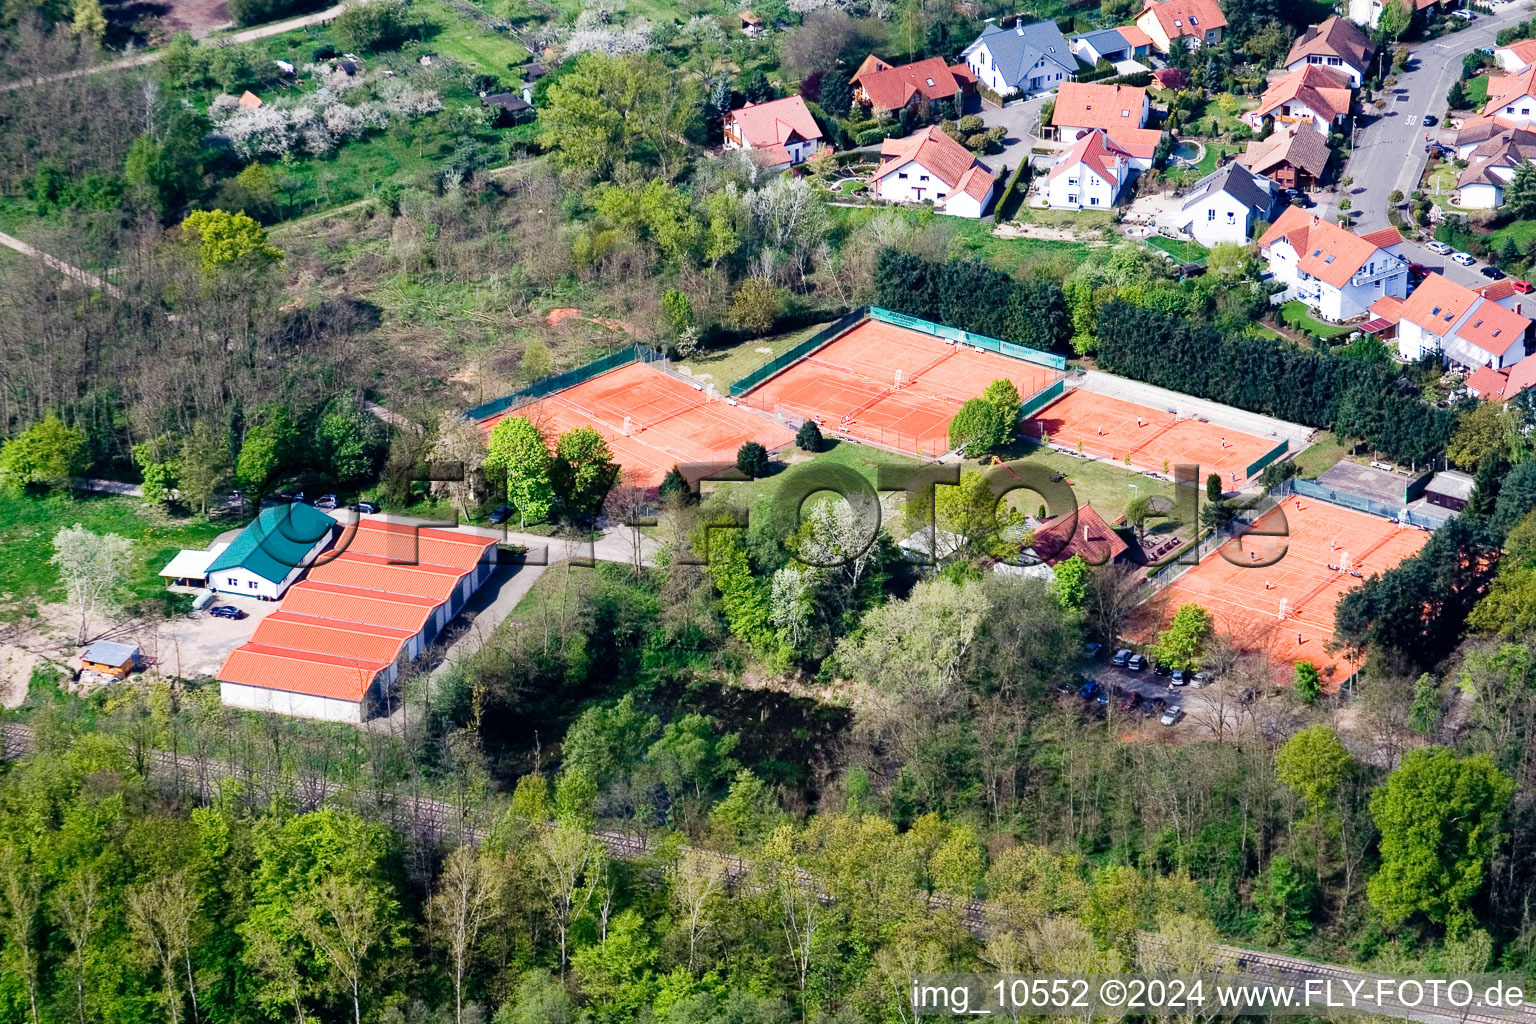 Tennis club in Jockgrim in the state Rhineland-Palatinate, Germany from the plane